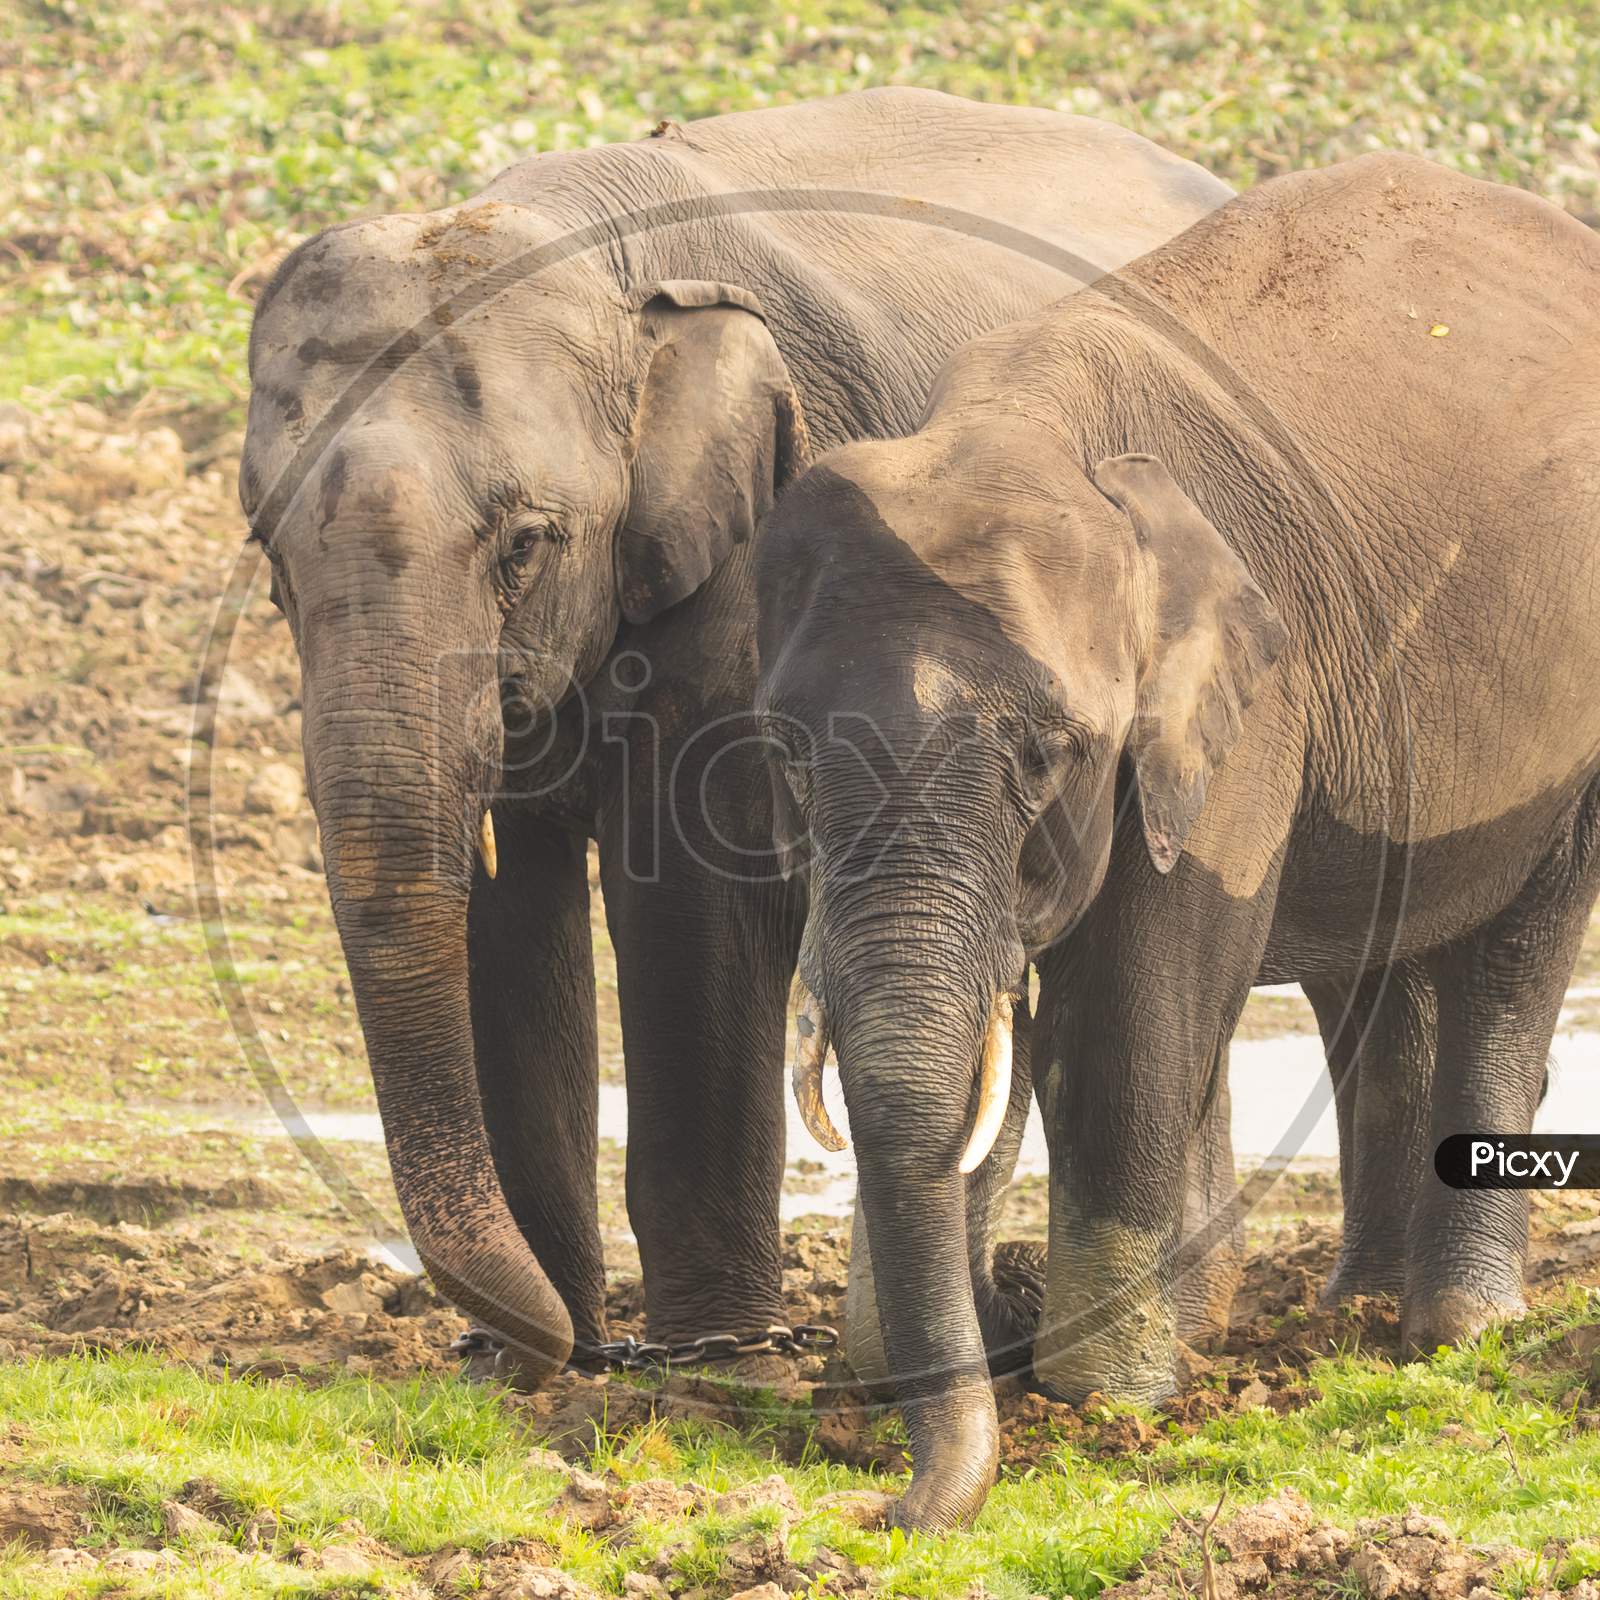 Two baby elephants with small tusks